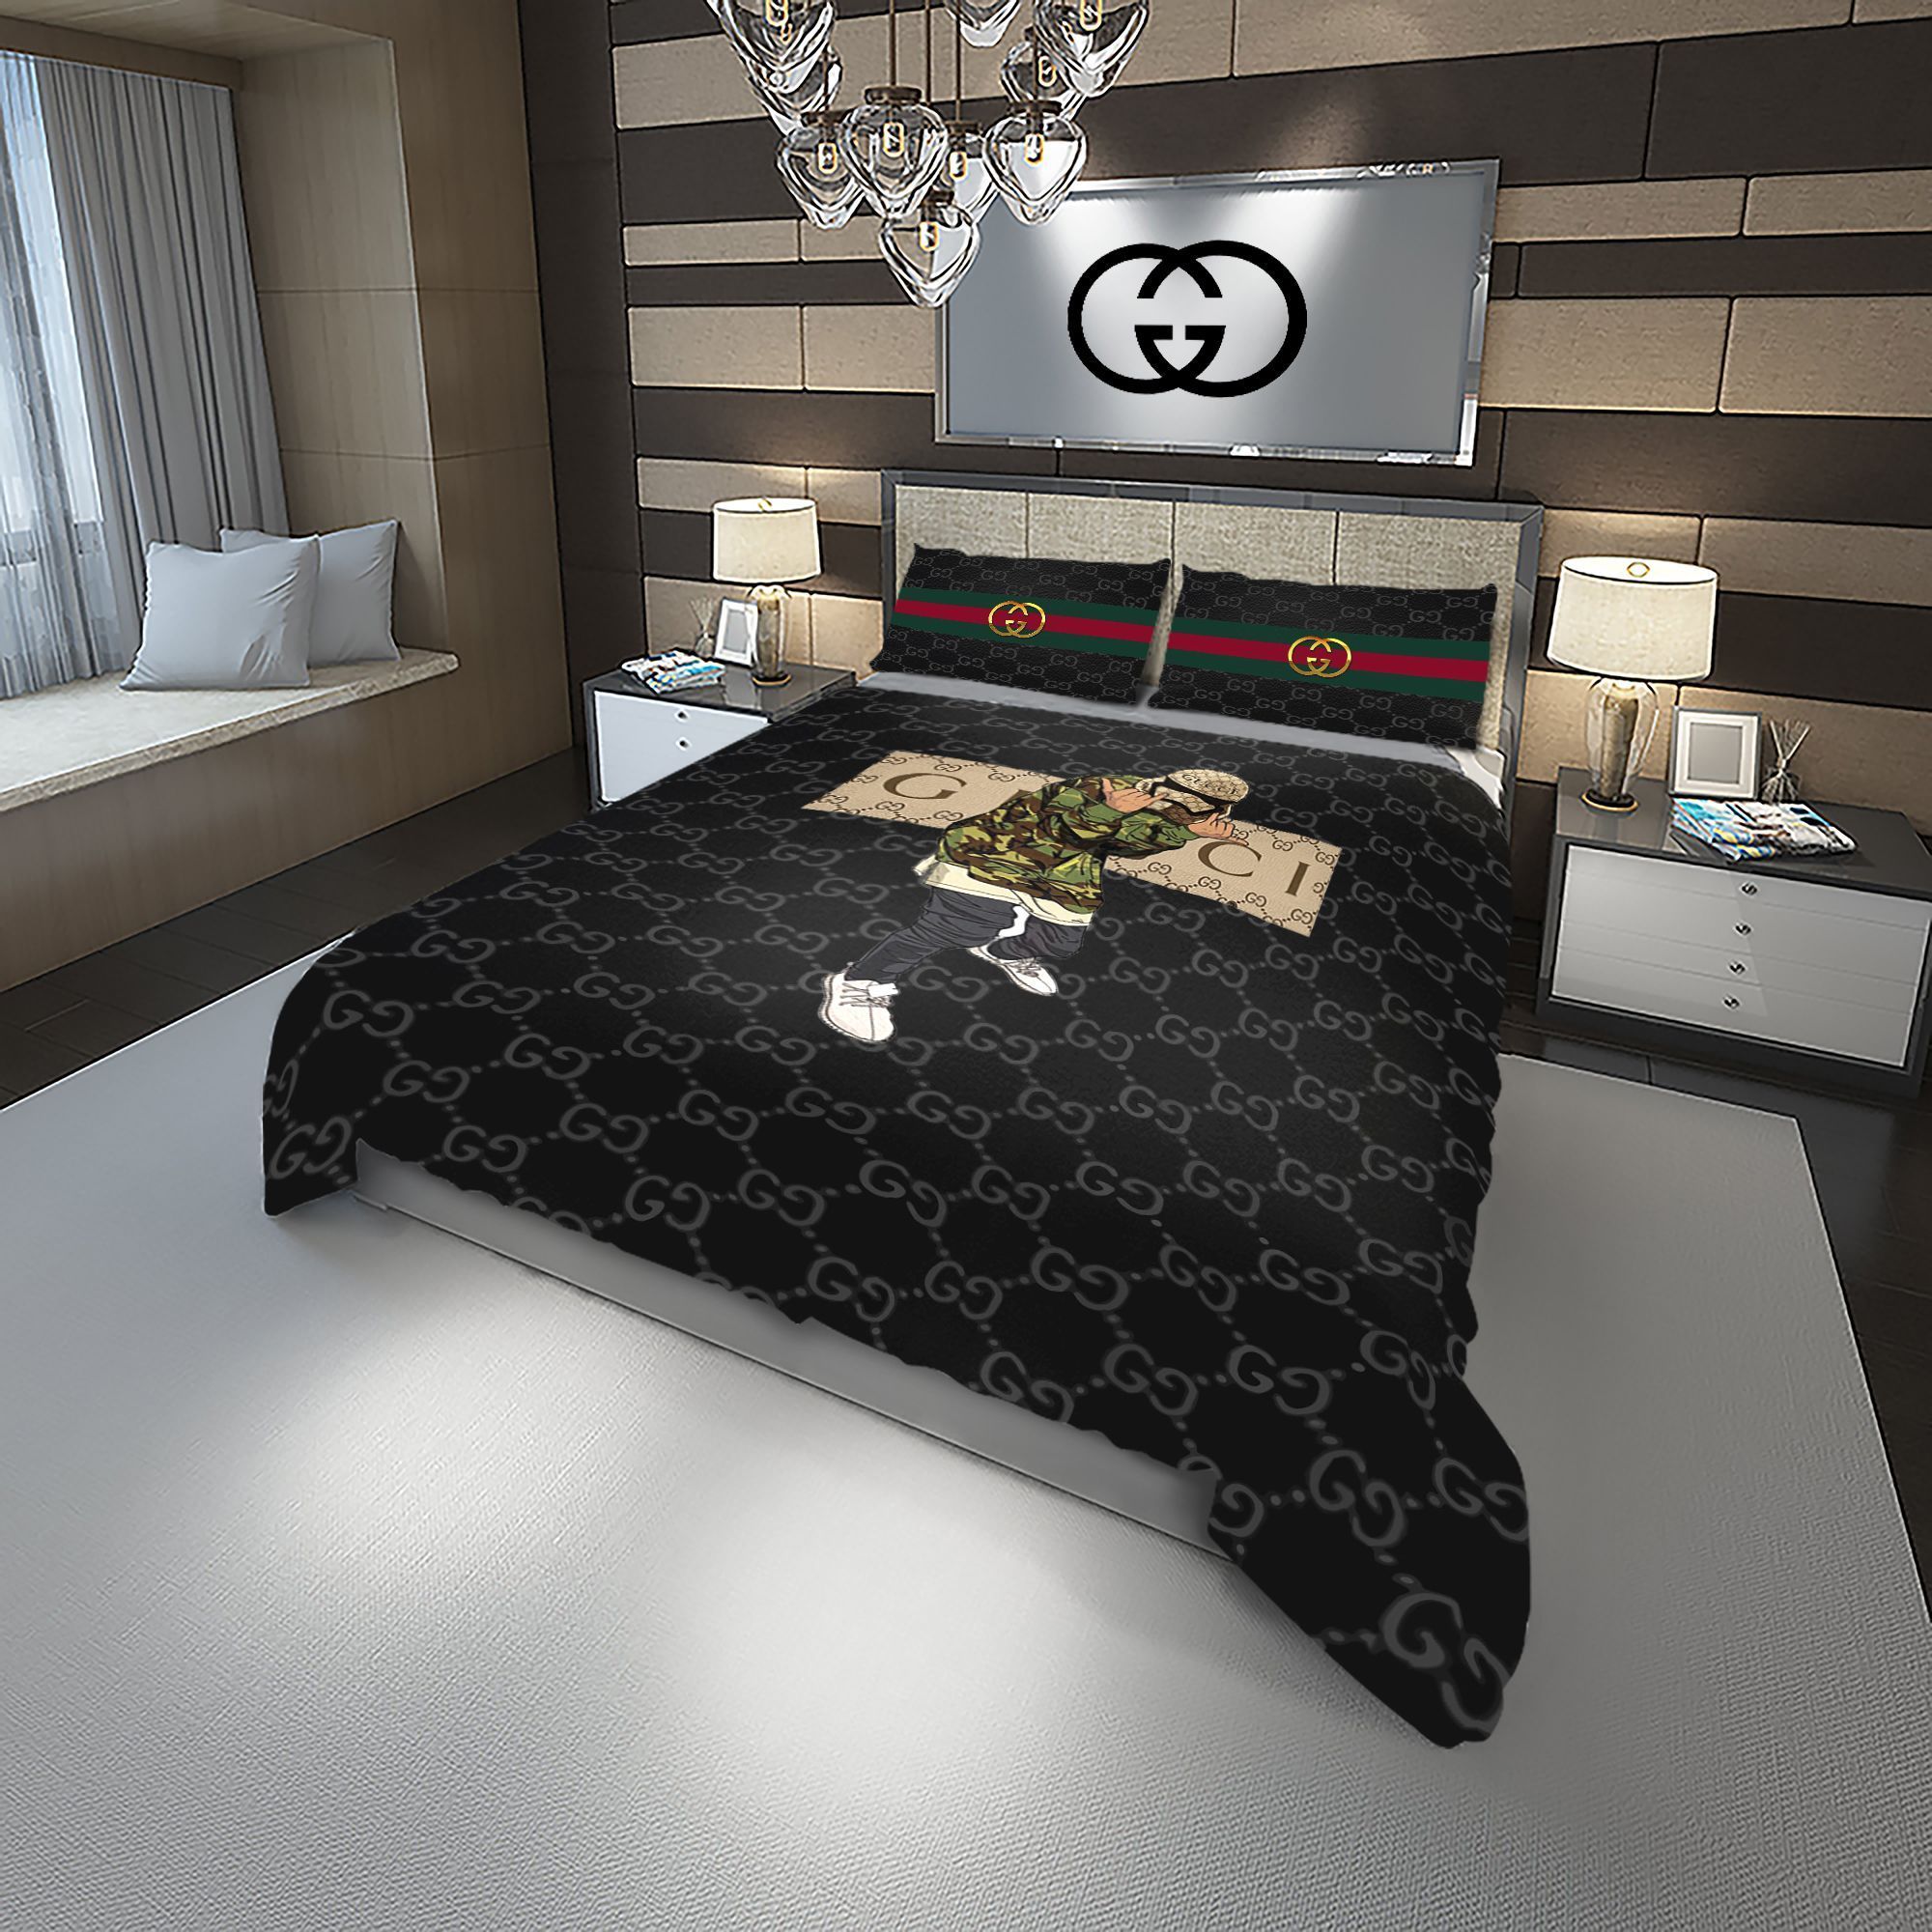 Let me show you about some luxury brand bedding set 2022 125